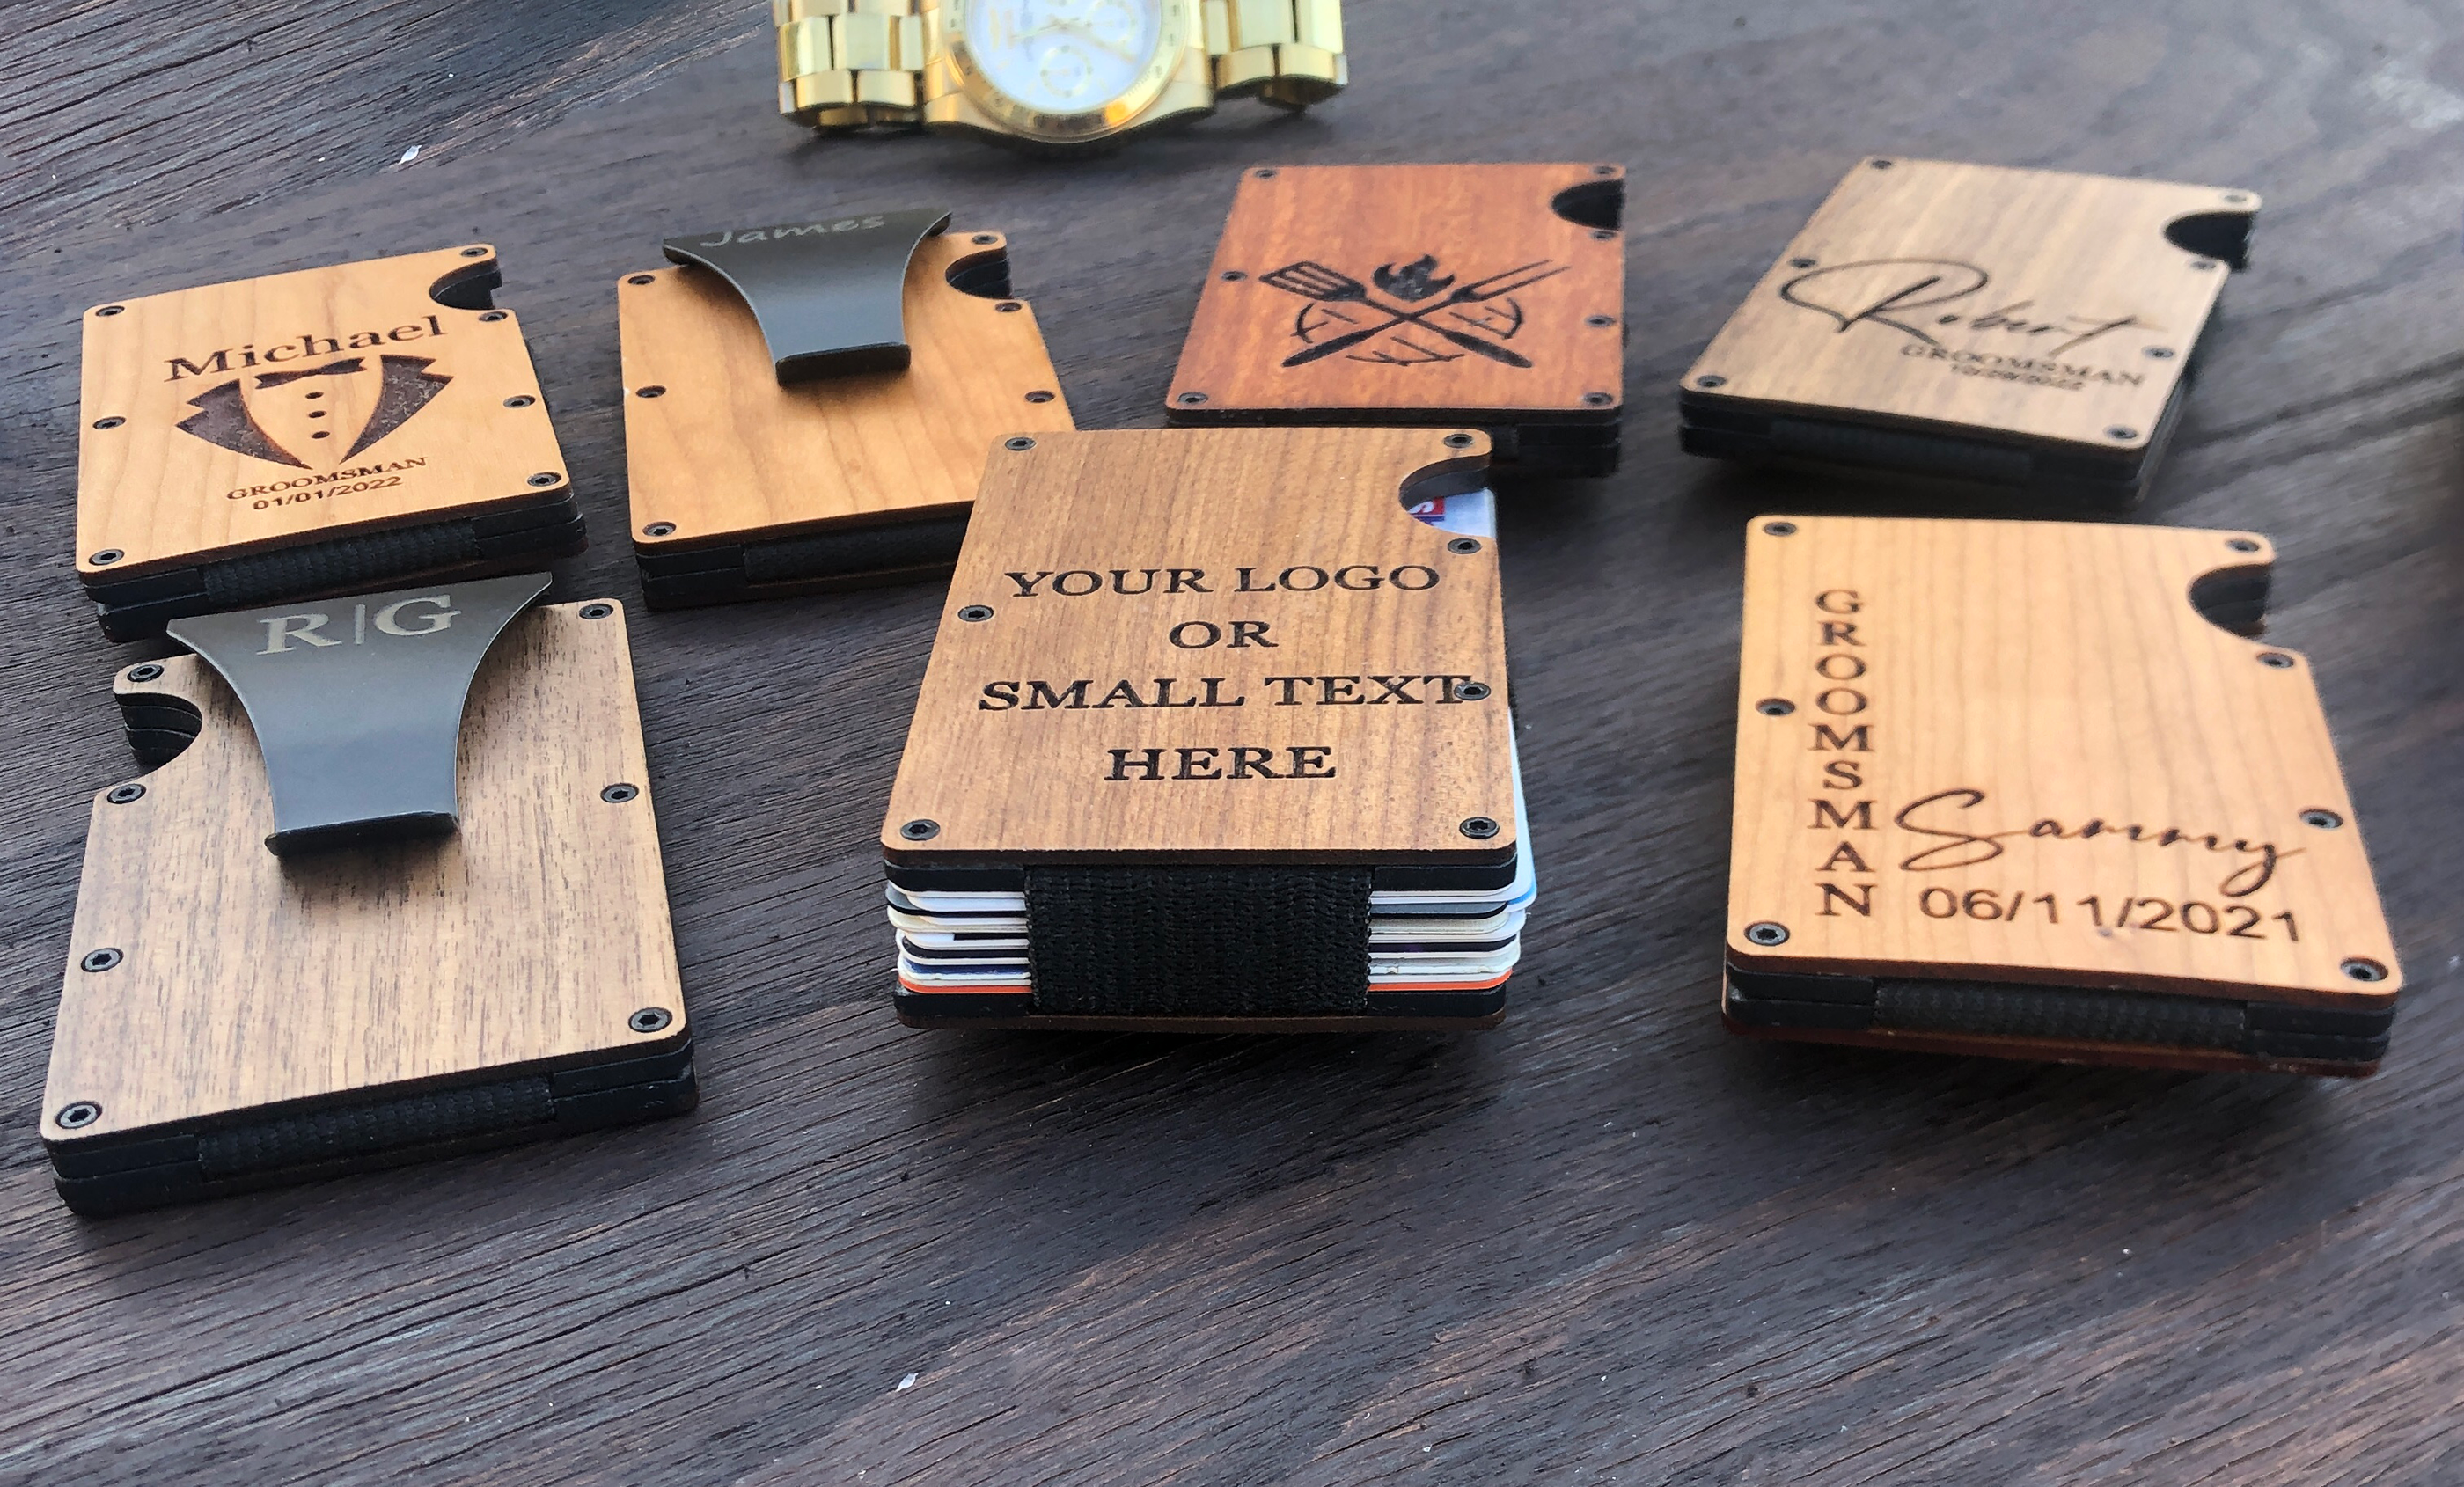 Custom Wooden Wallet, Personalized Card Holder Money Clip, Groomsmen Gifts, Christmas Gifts Proposal, Corporate Fathers Day Gifts for DAD